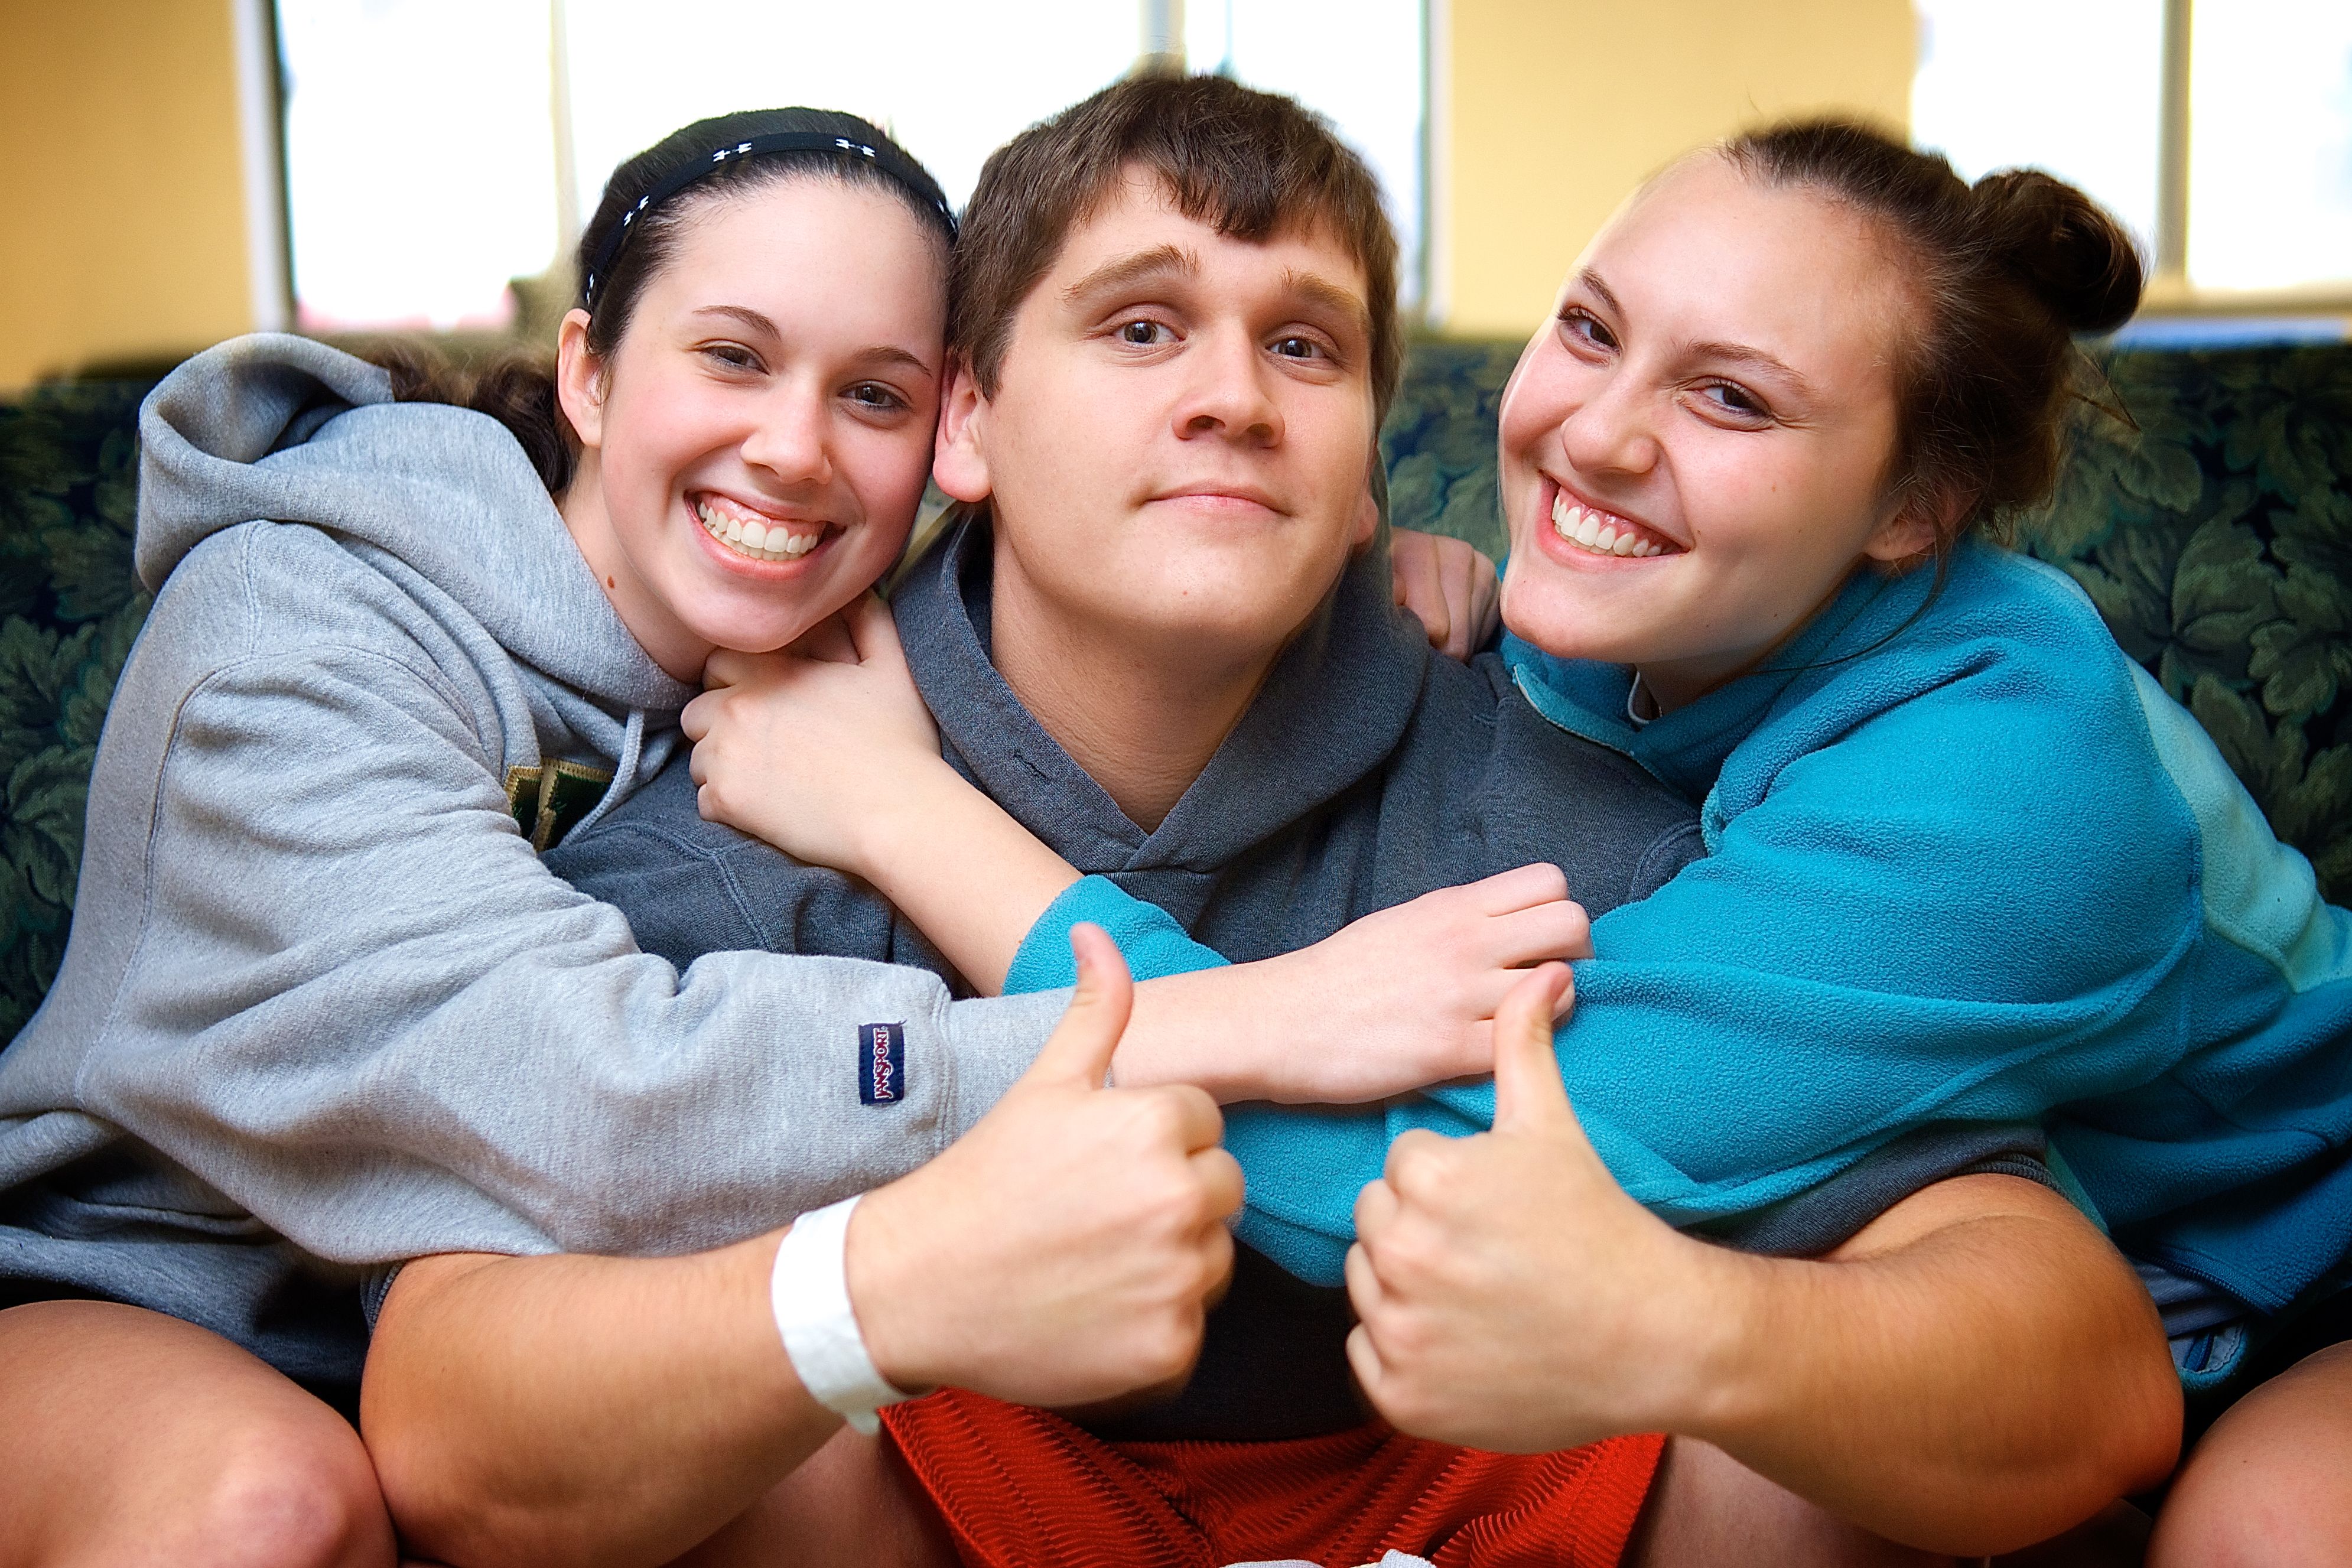 Male college student with twin sisters hugging him gives thumbs up